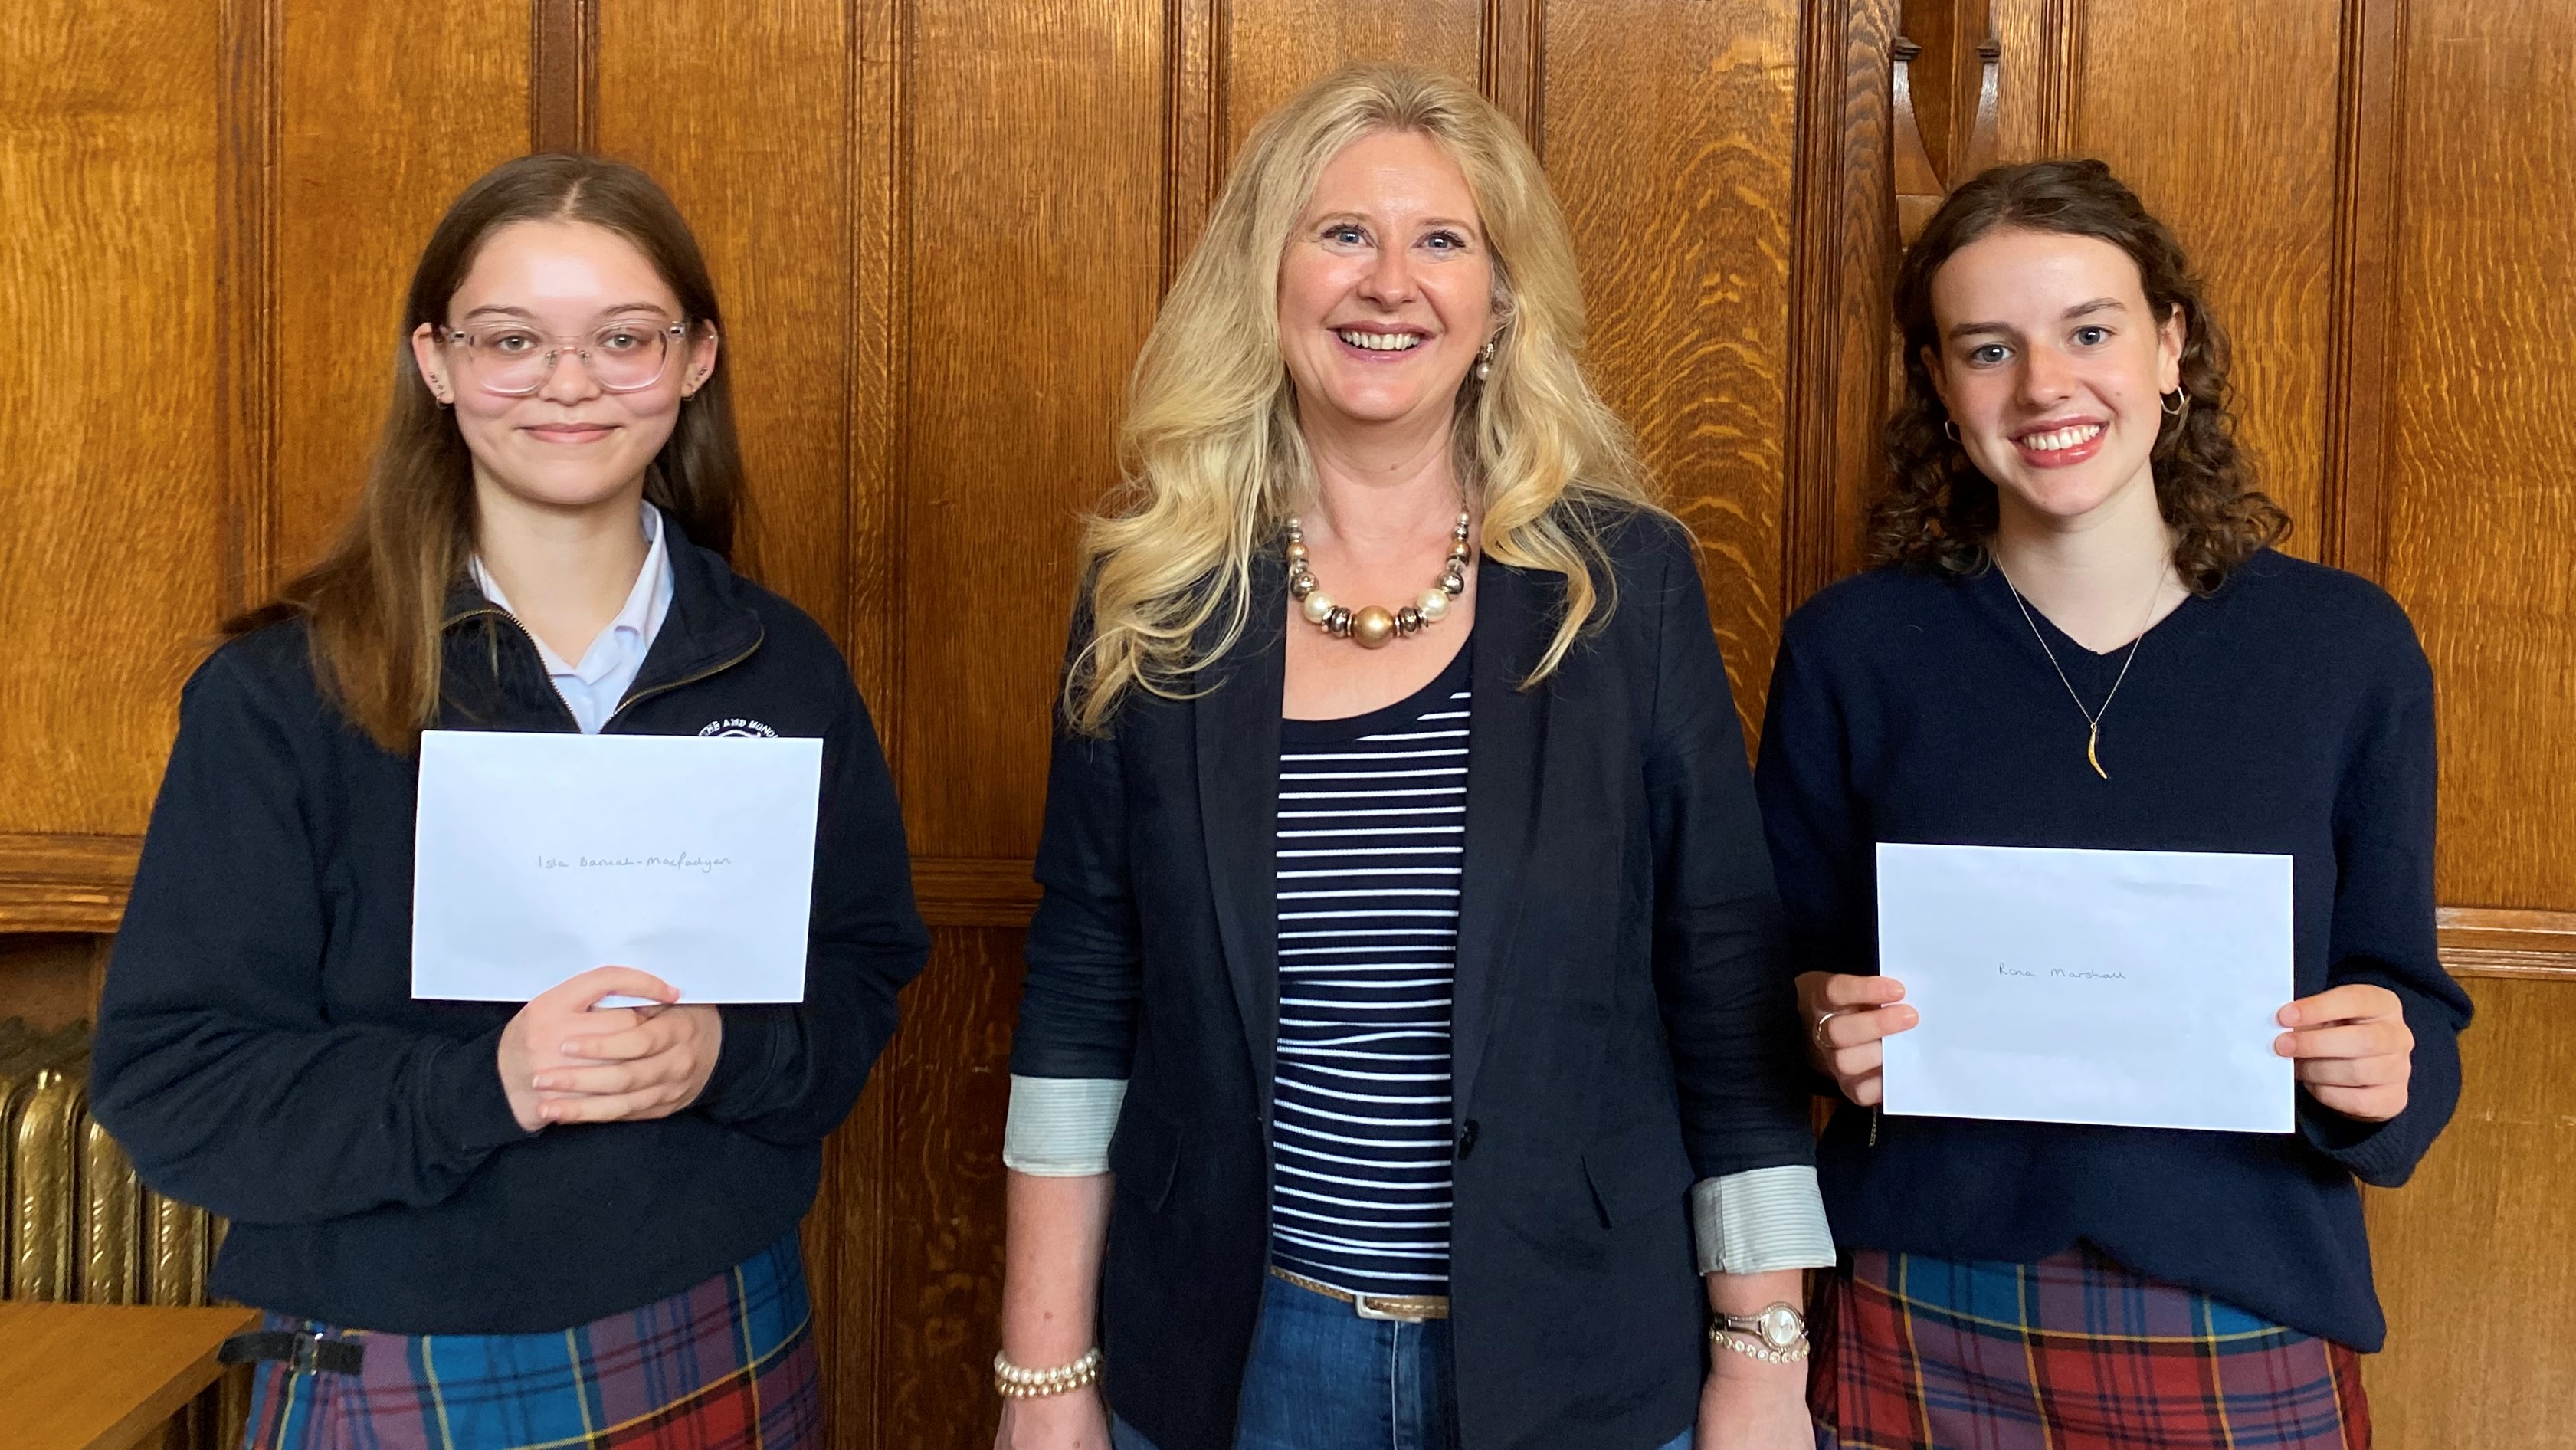 Colour photo of School of Divinity Video Competition winners stood holding their prizes with Professor Helen Bond